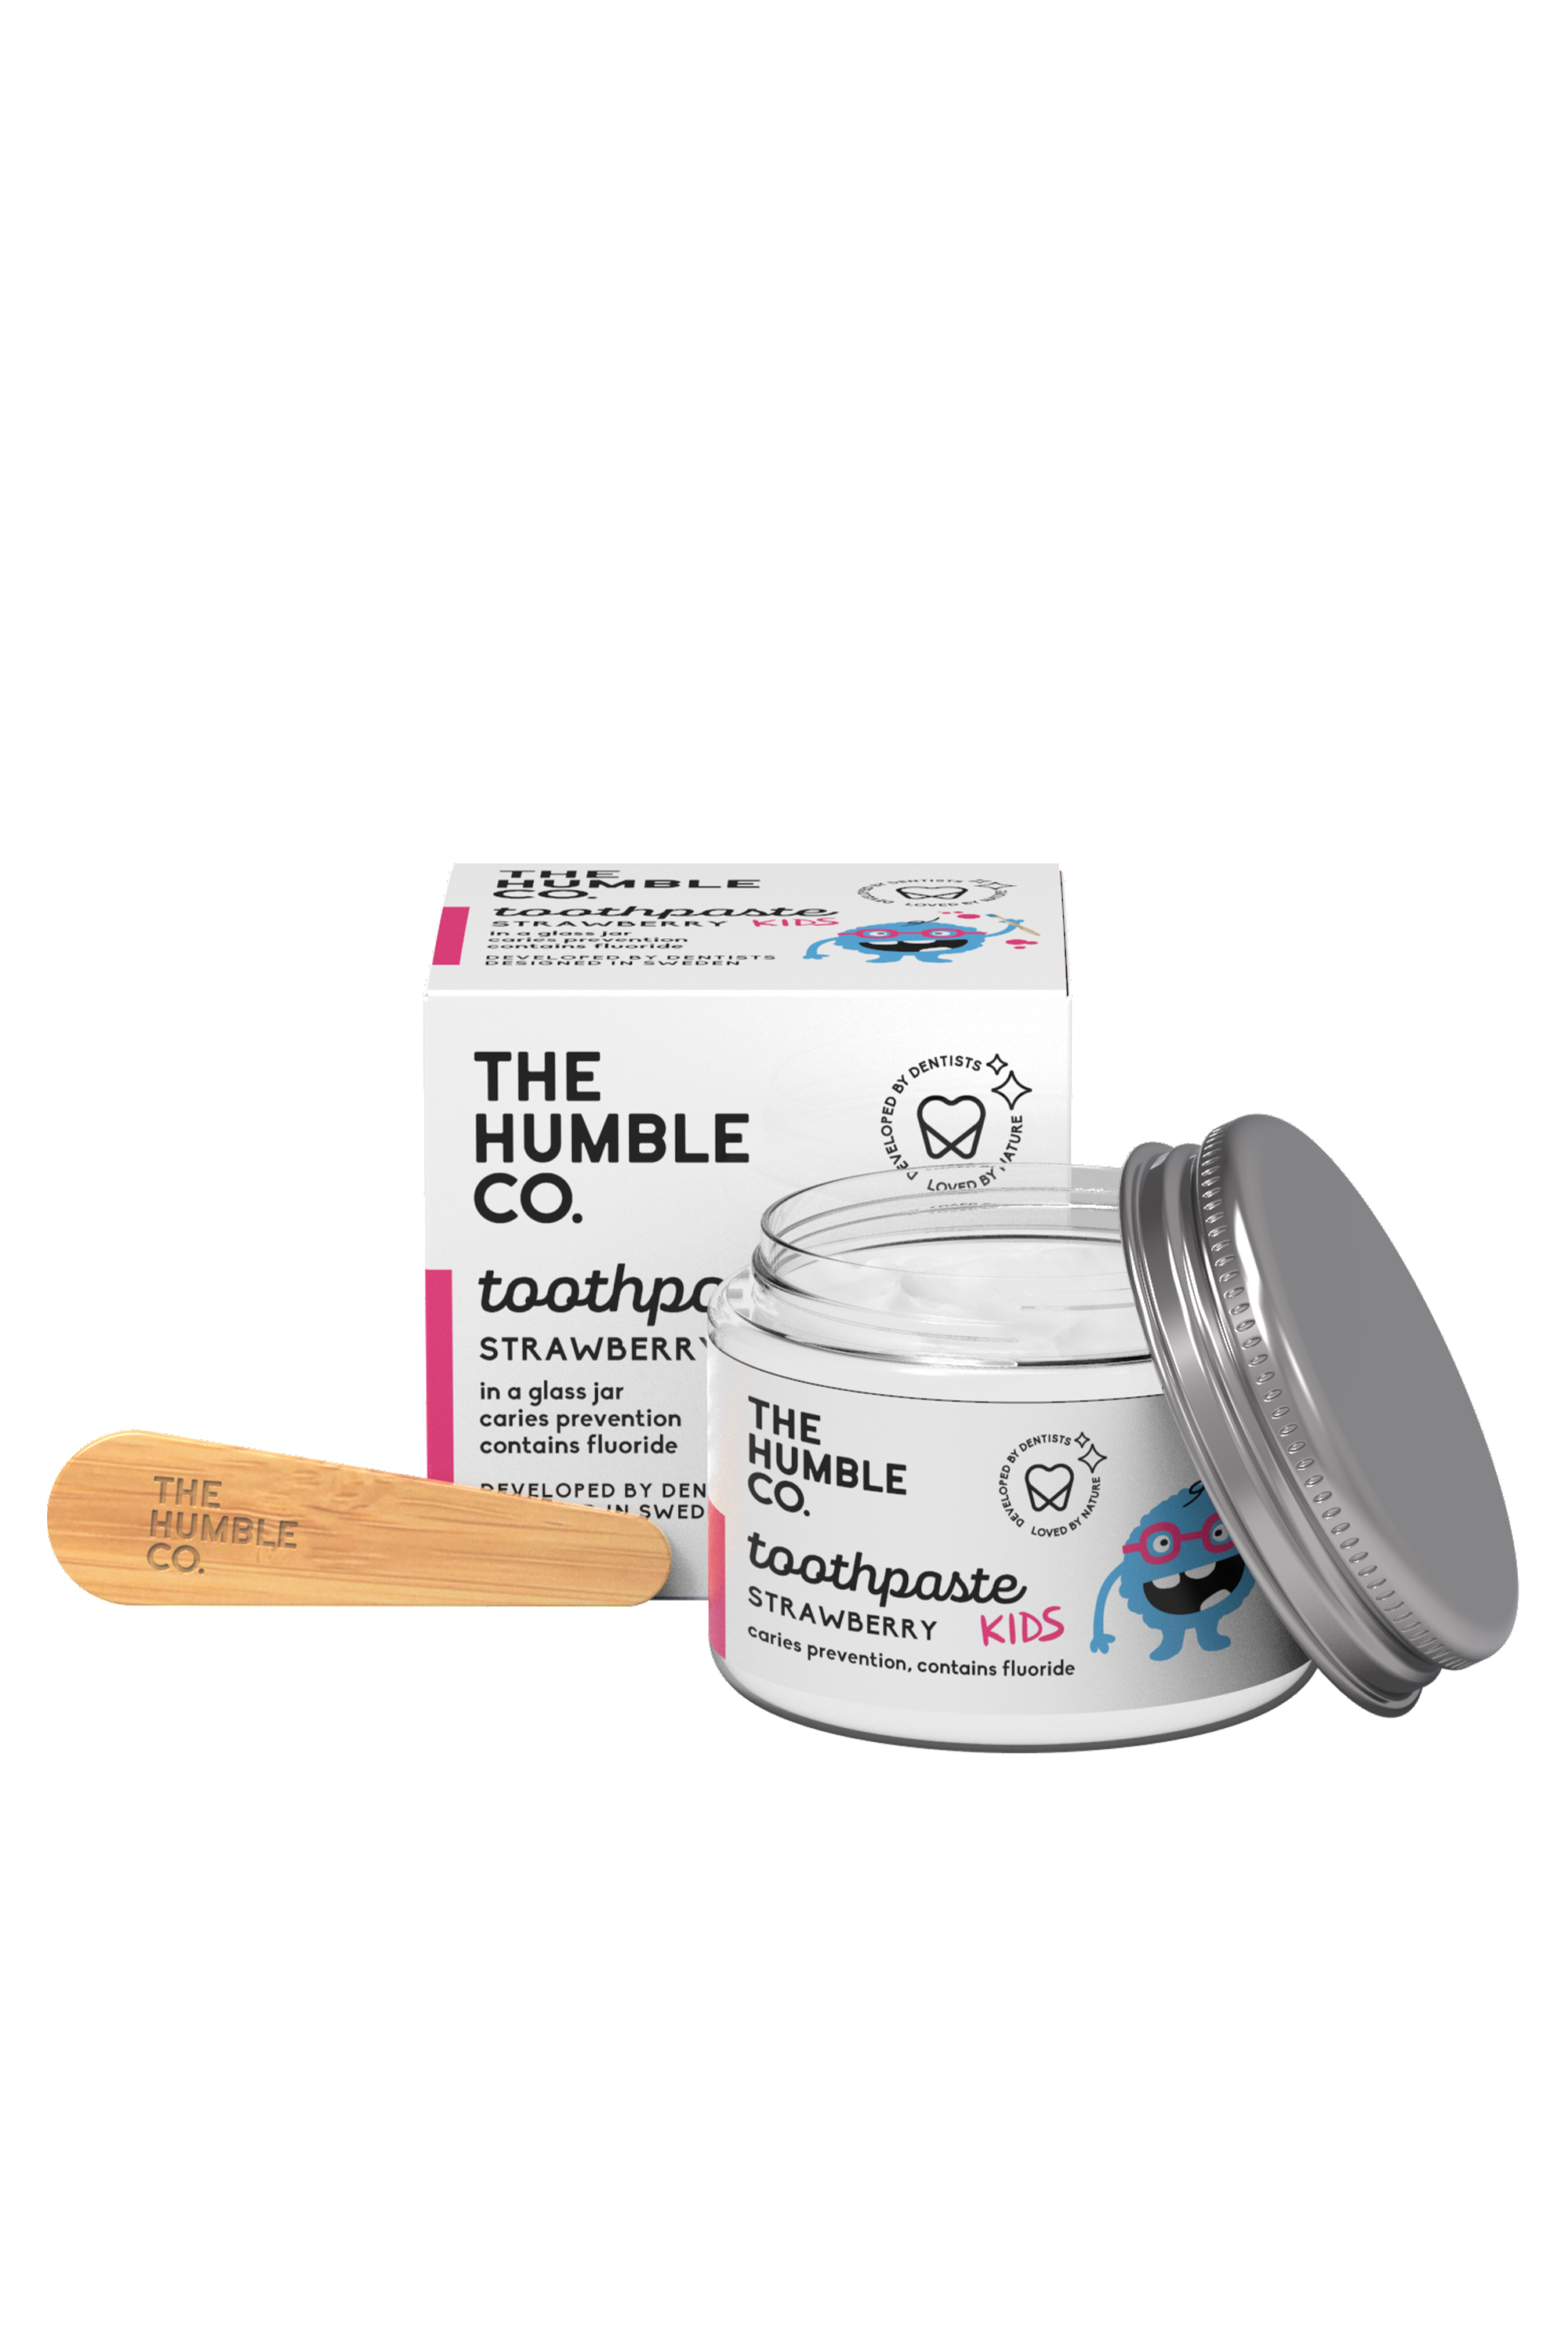 The Humble Co. Humble Natural Toothpaste Kids, Strawberry, med fluor, i krukke, 50